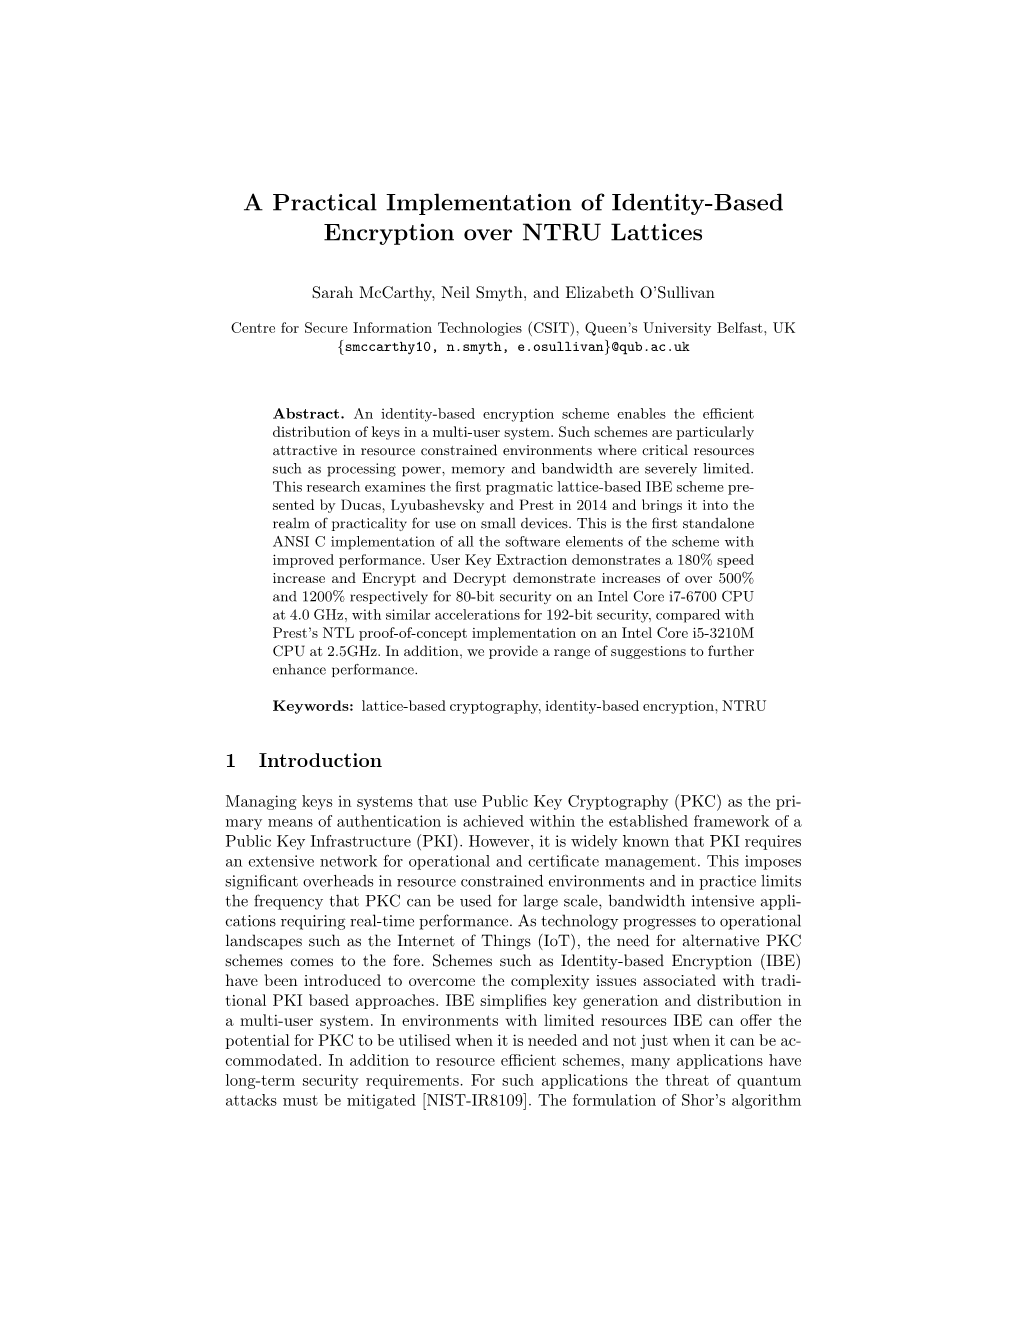 A Practical Implementation of Identity-Based Encryption Over NTRU Lattices